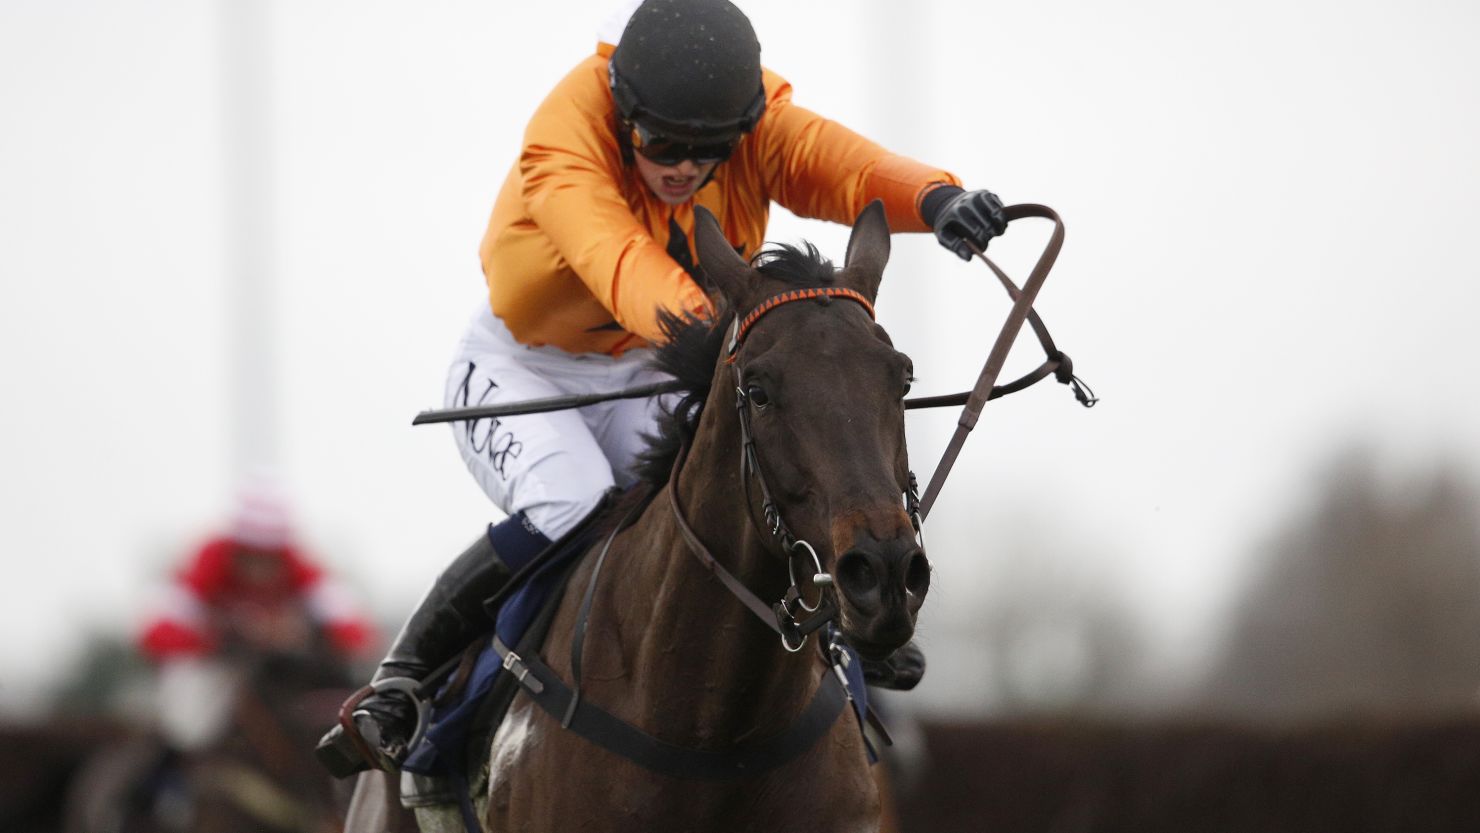 Lizzie Kelly riding Tea For Two to victory at Kempton Park racecourse on December 26, 2015.